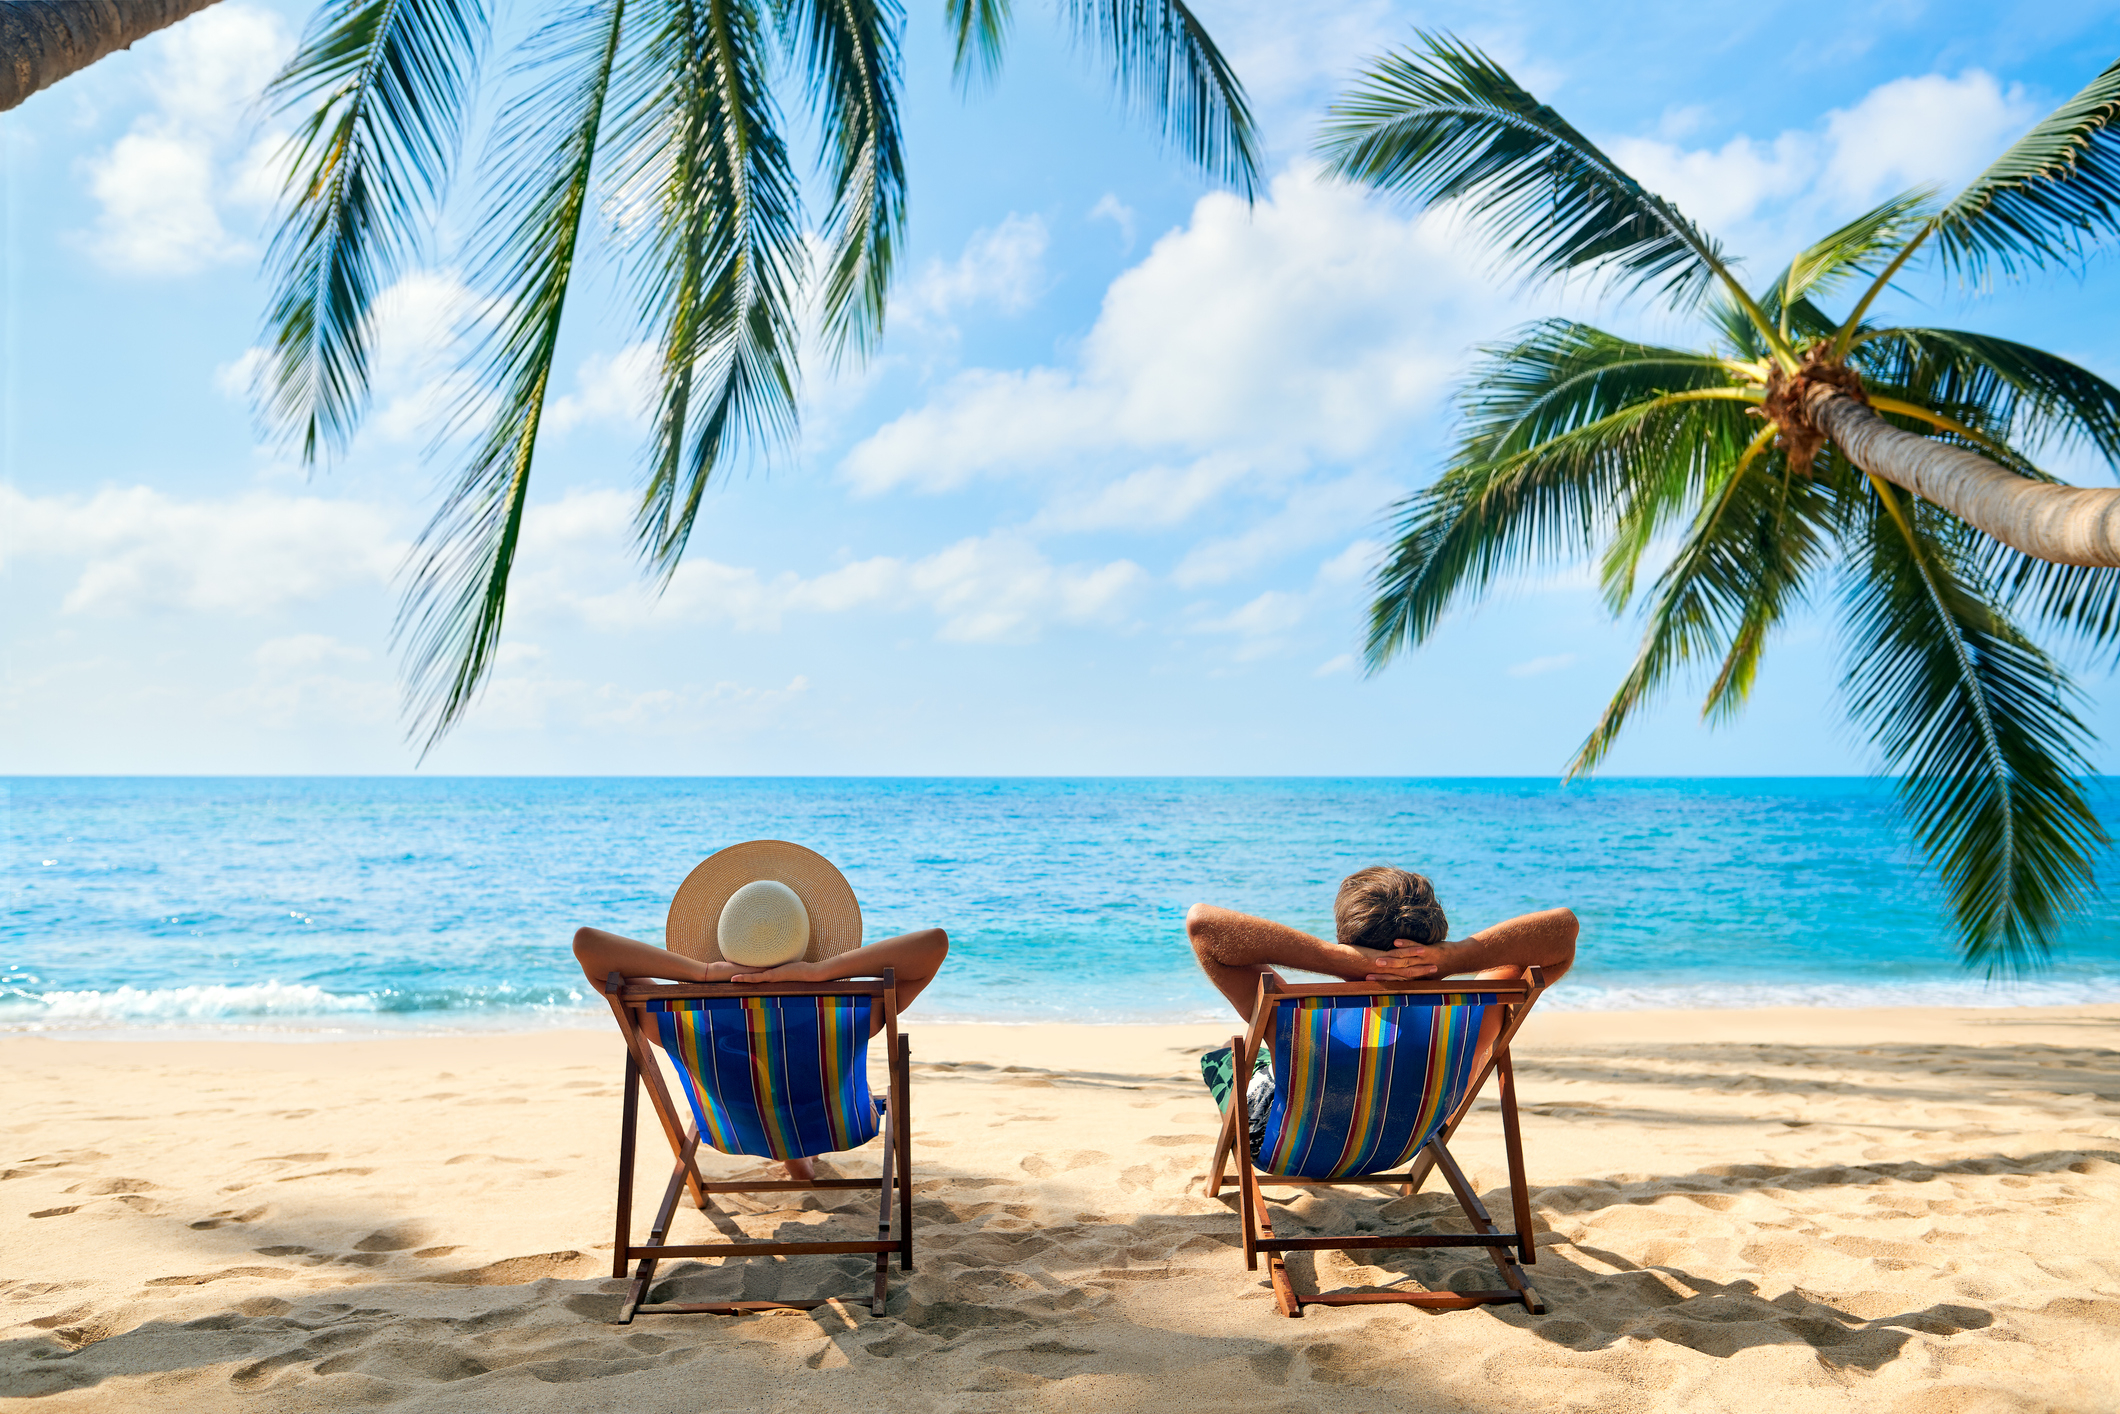 A couple sitting in deck chairs on a beach